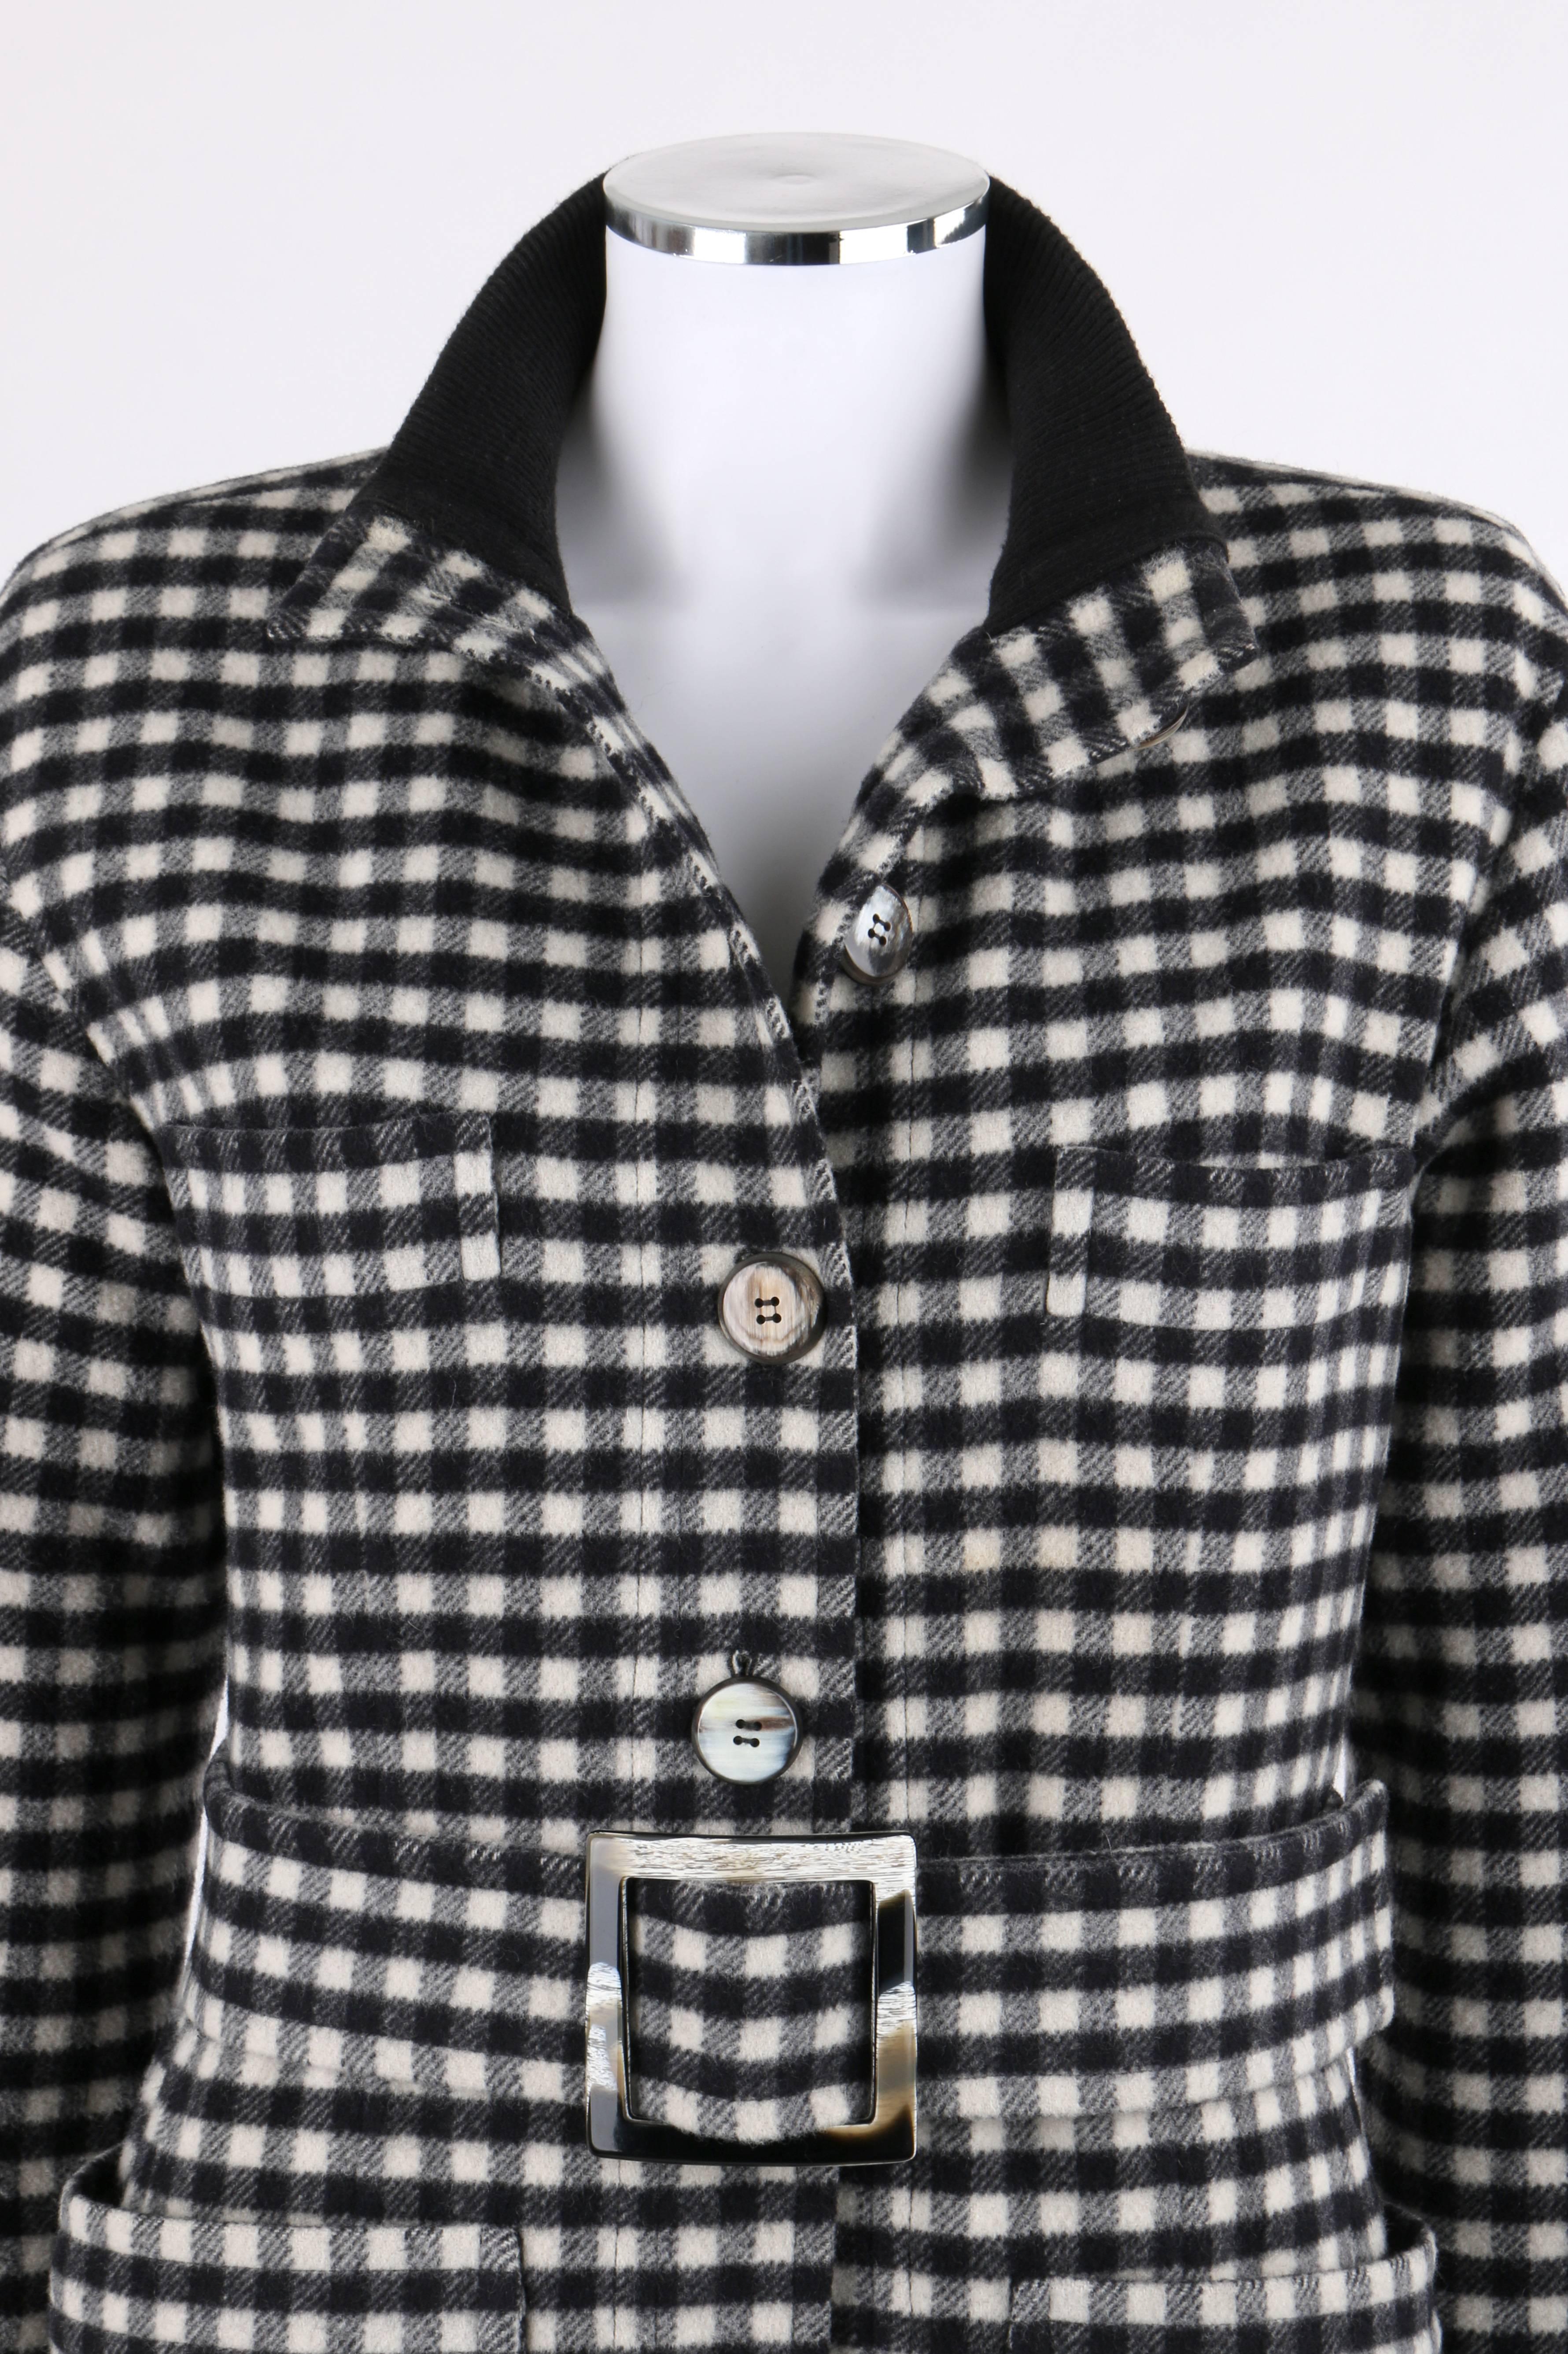 Yves Saint Laurent Autumn / Winter 1992 YSL black and white wool cashmere shepherd check belted coat. Black rib knit standing collar. Seven center front button closures. Long sleeves with black rib knit cuffs. Two single welt breast pockets. Two